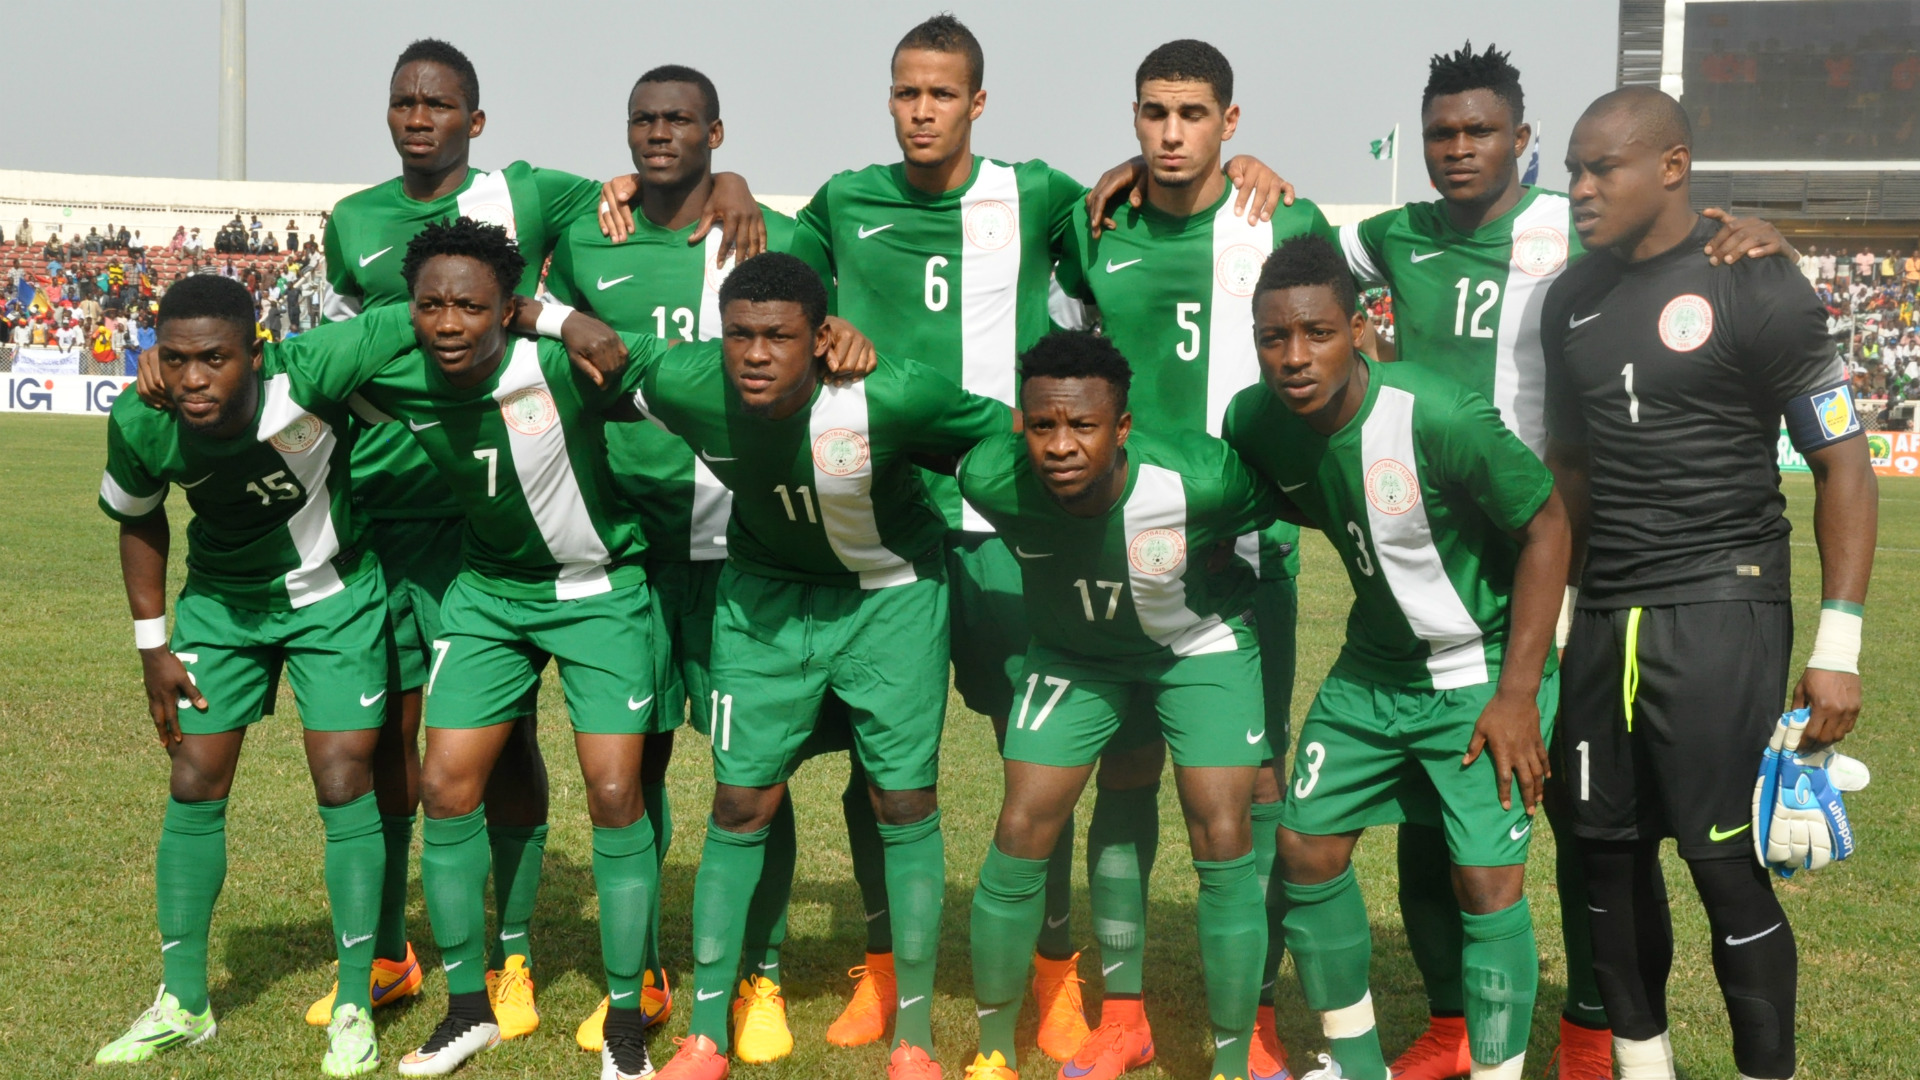 Nigeria set to pay players in Naira for home games: dollars banished